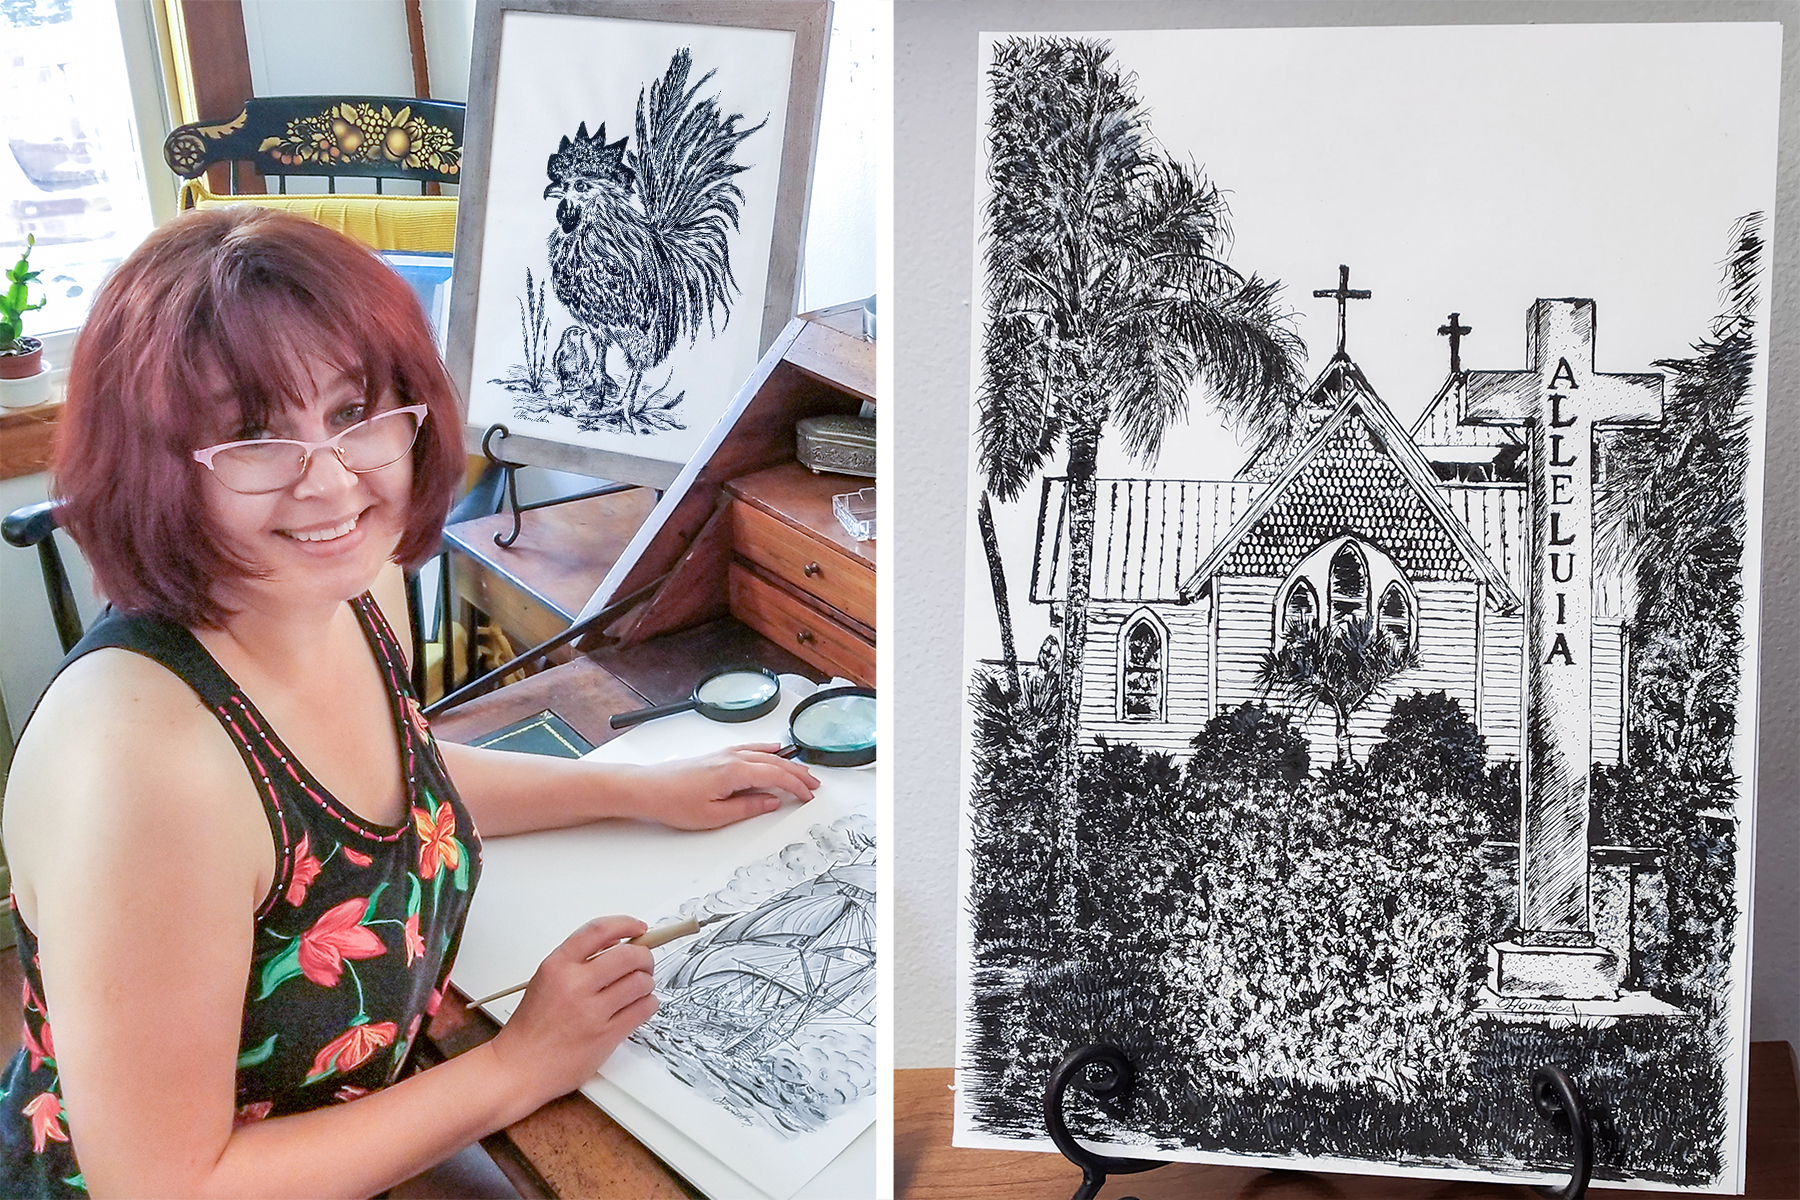 "All Saints Episcopal Church in Jensen Beach" Ink and Pen Drawing by Olga Hamilton.